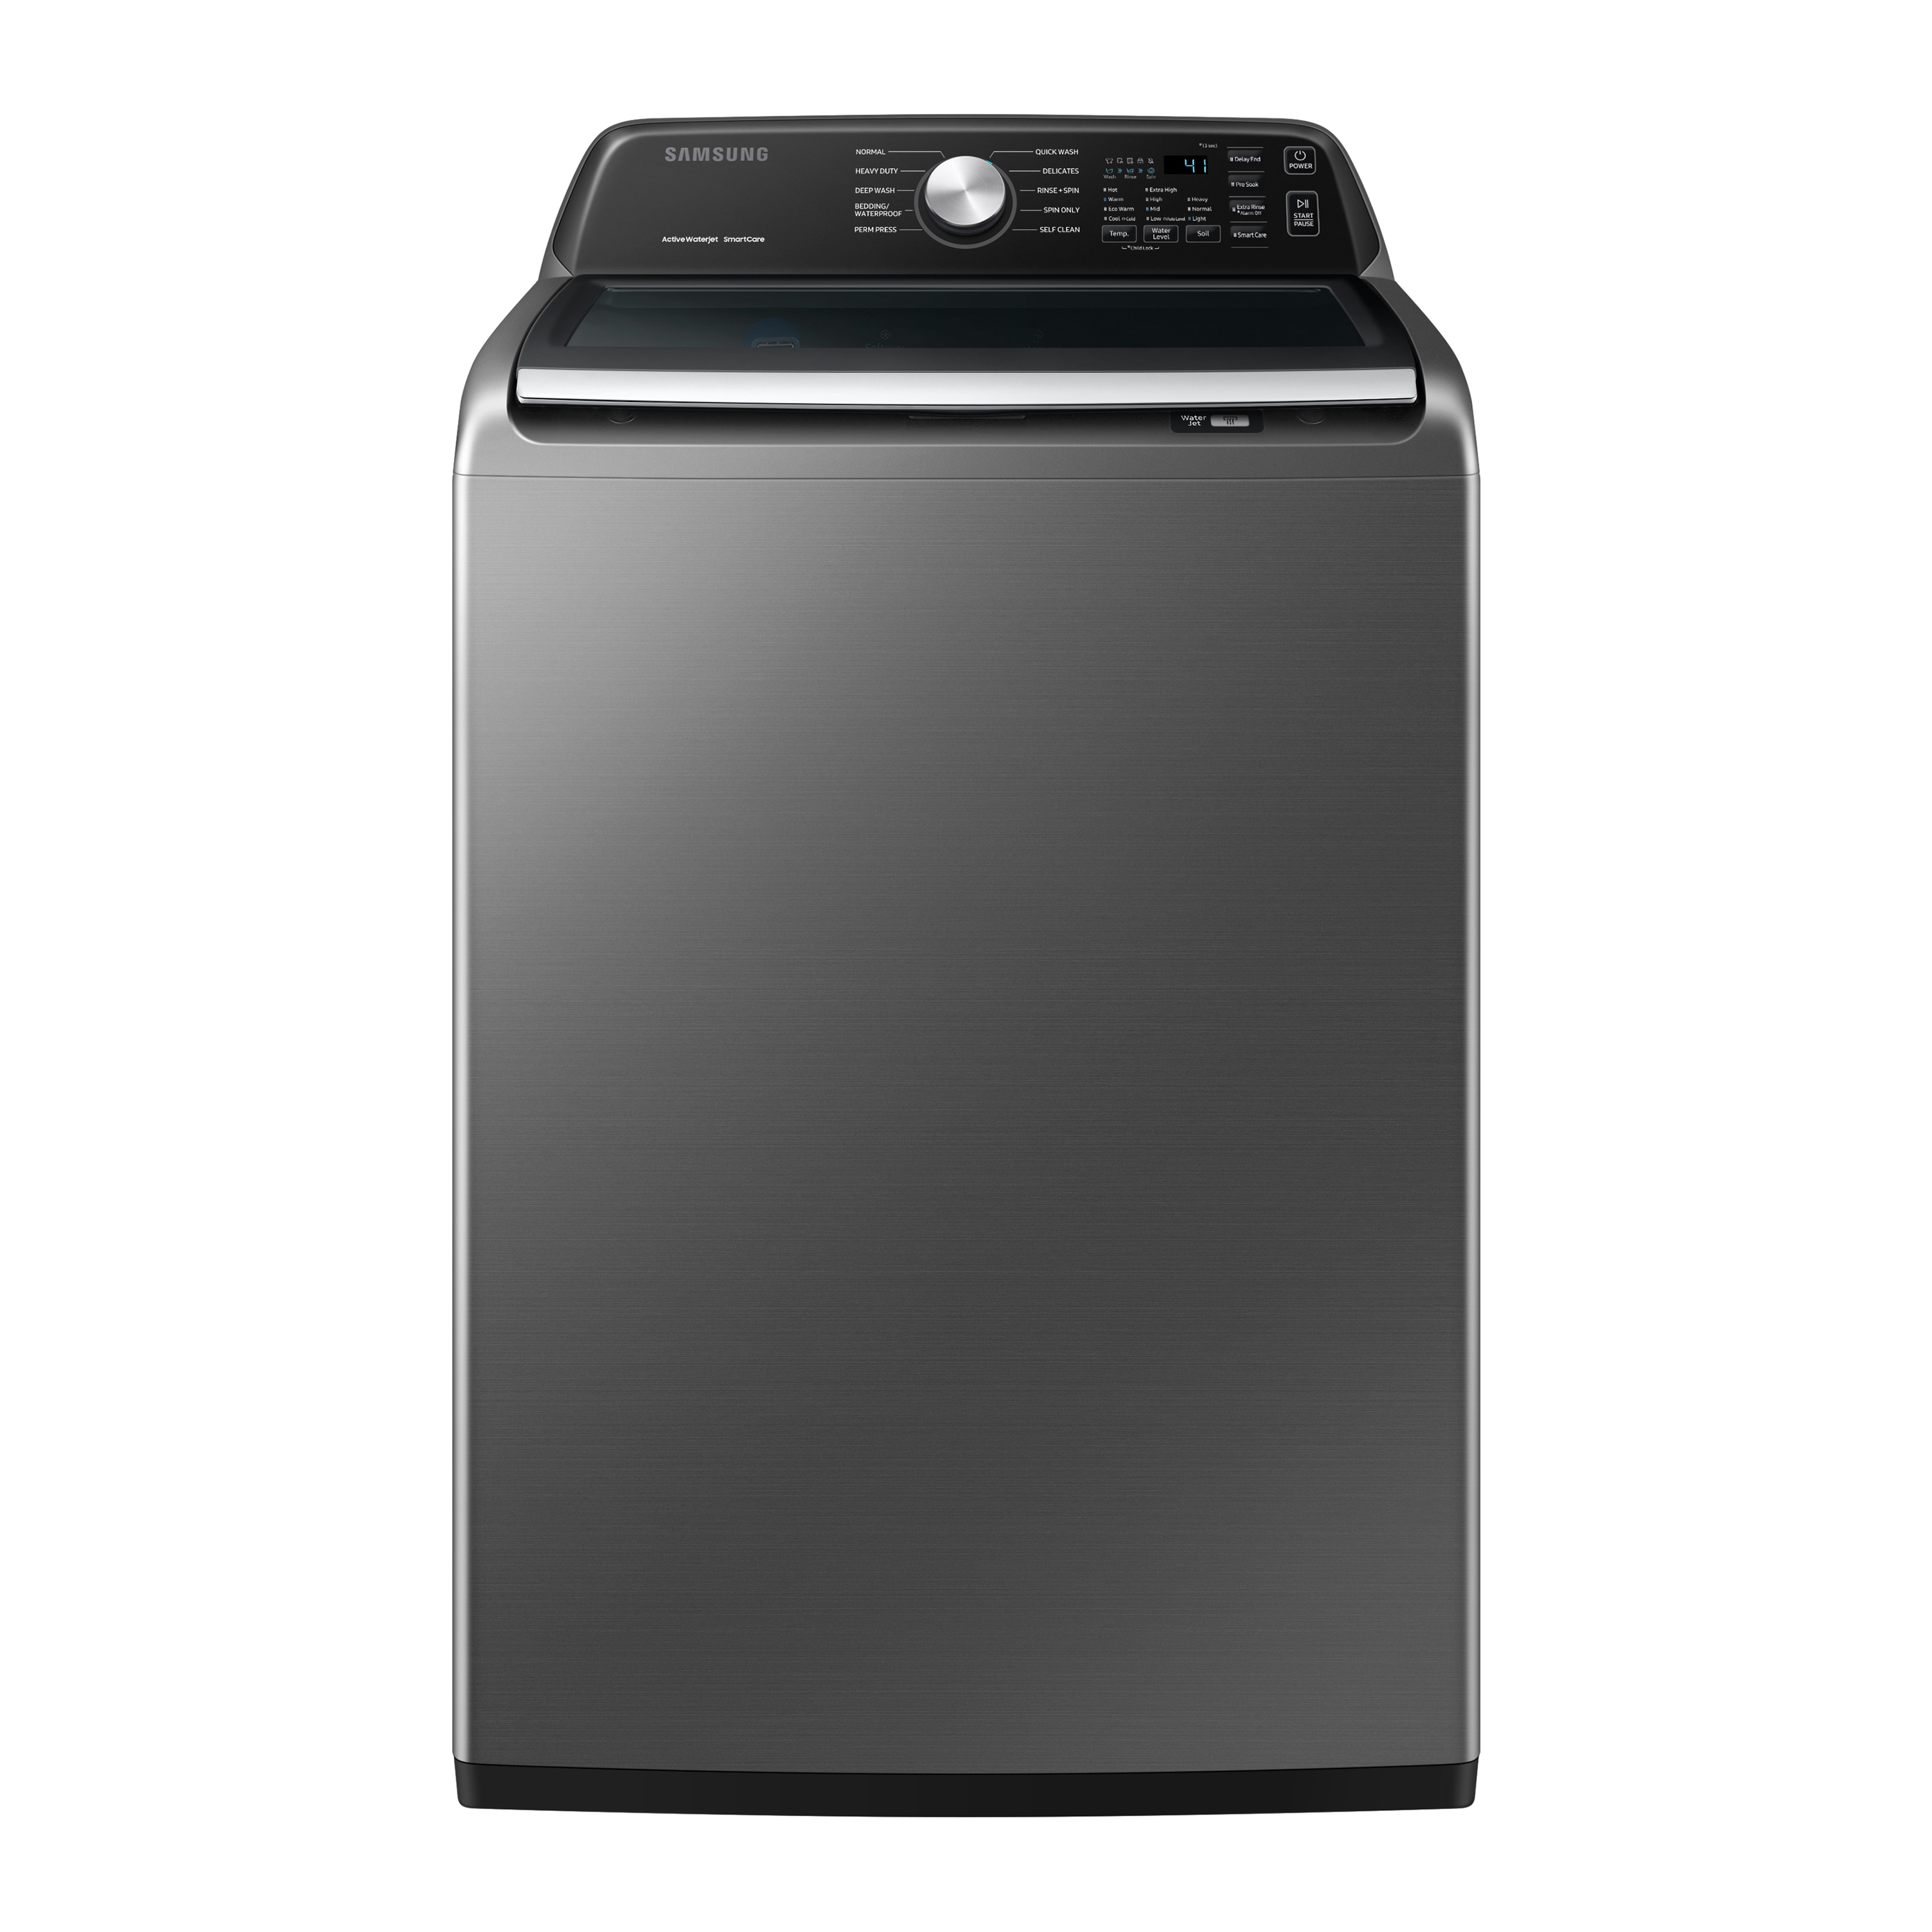 samsung-medium-3-5-4-5-cu-ft-top-load-washers-at-lowes